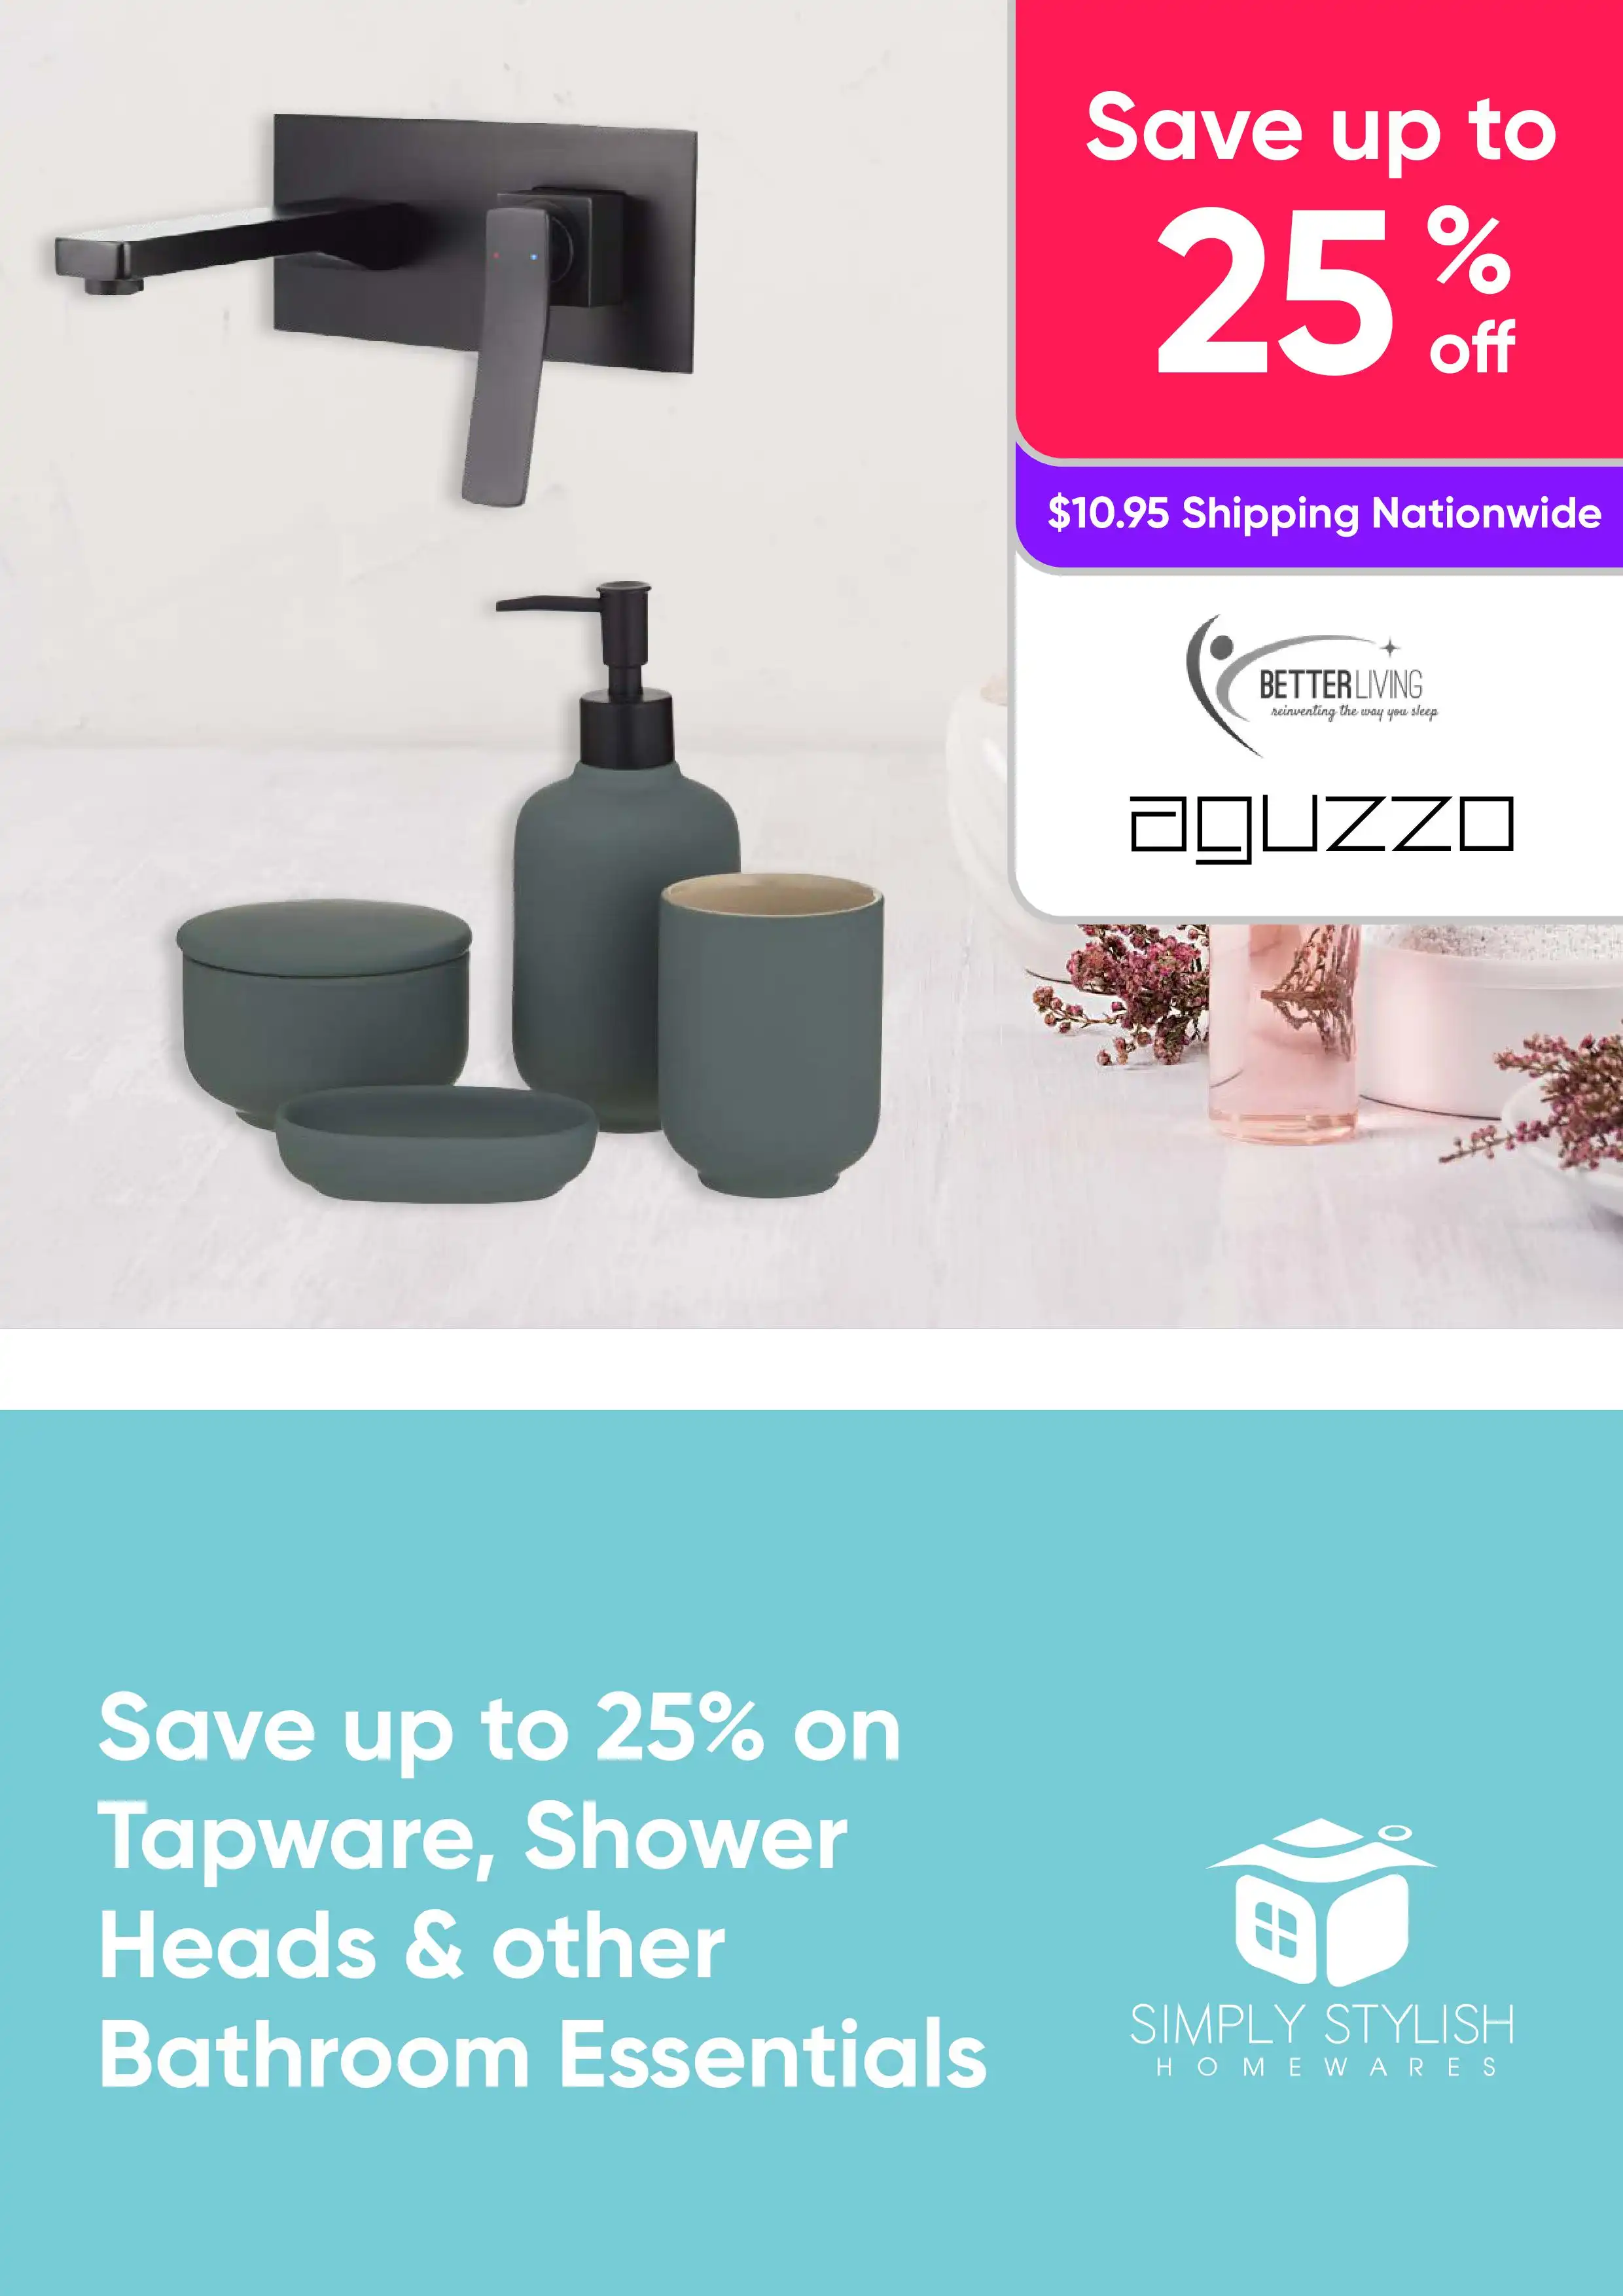 Save up to 25% on Tapware, Shower Heads & other Bathroom Essentials